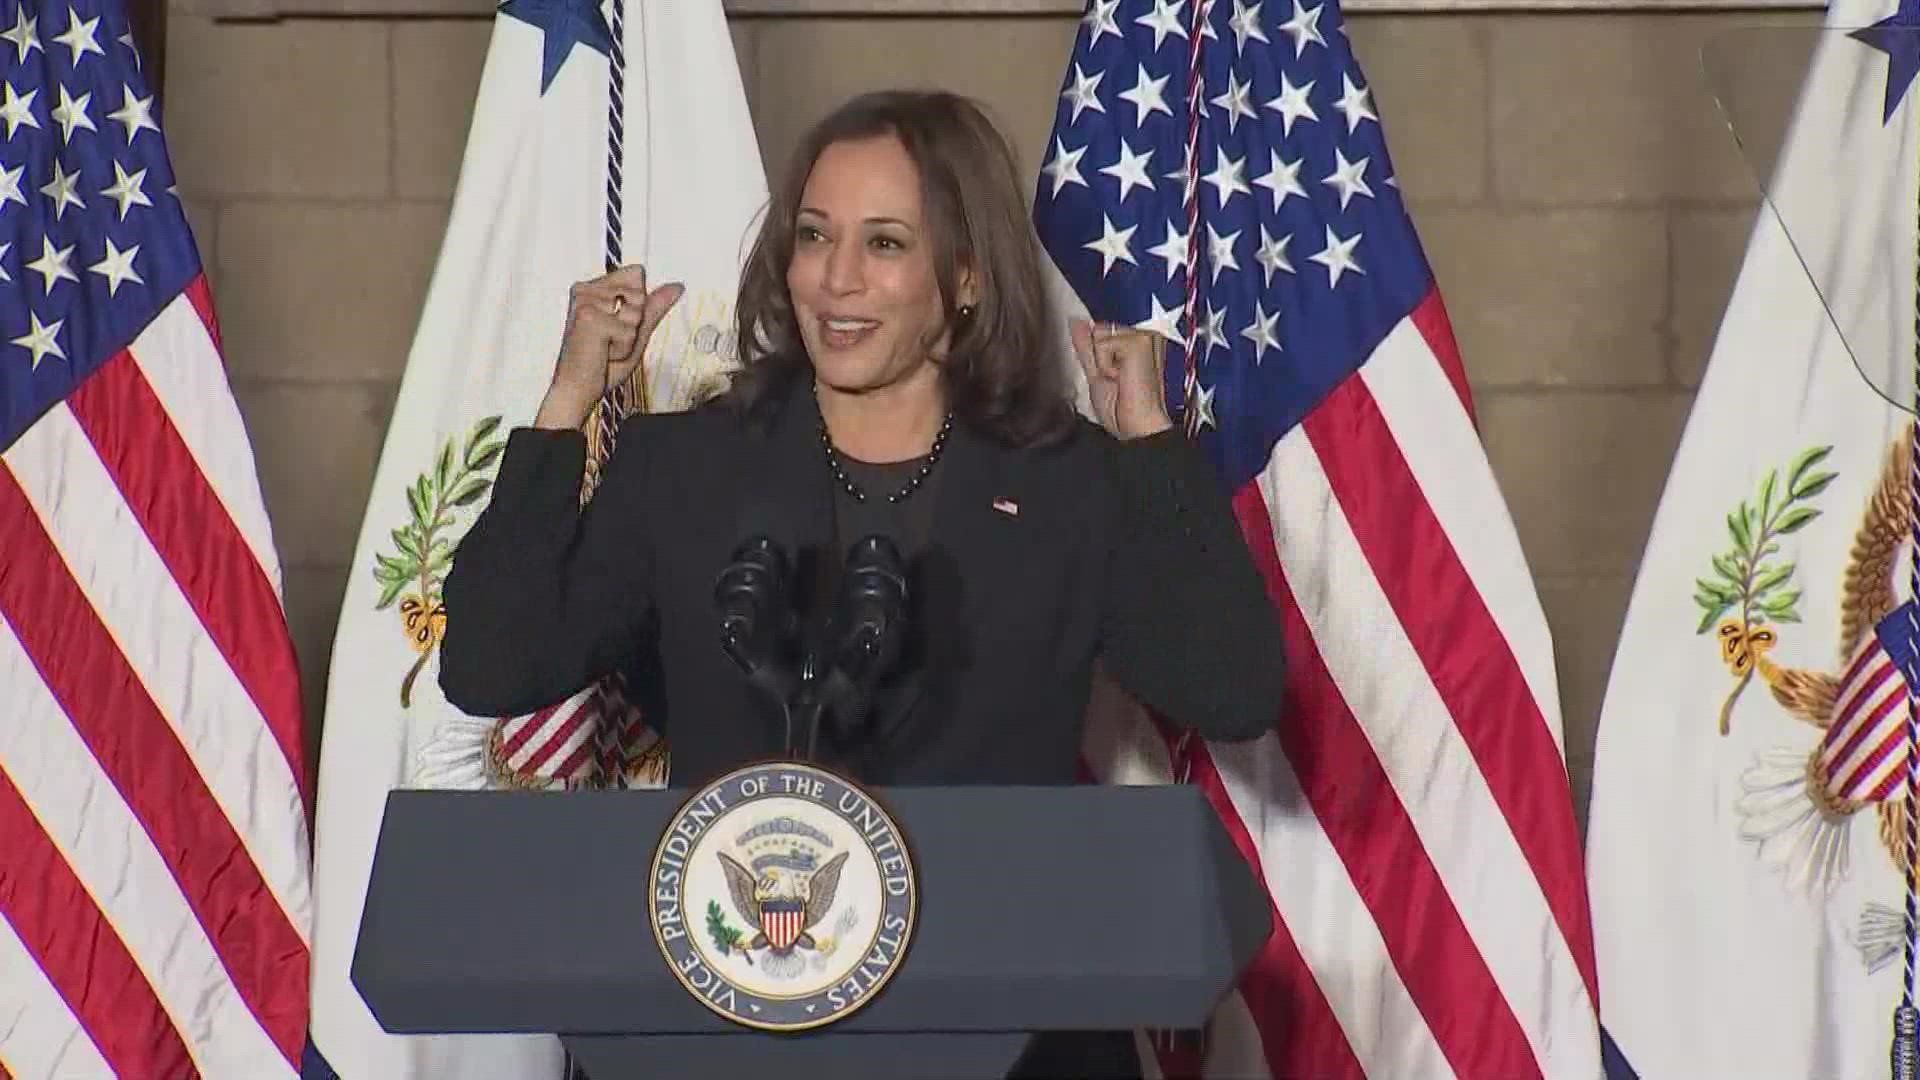 Vice President Kamala Harris spoke about the Biden administration's infrastructure deal and the impact it will have on Ohioans.